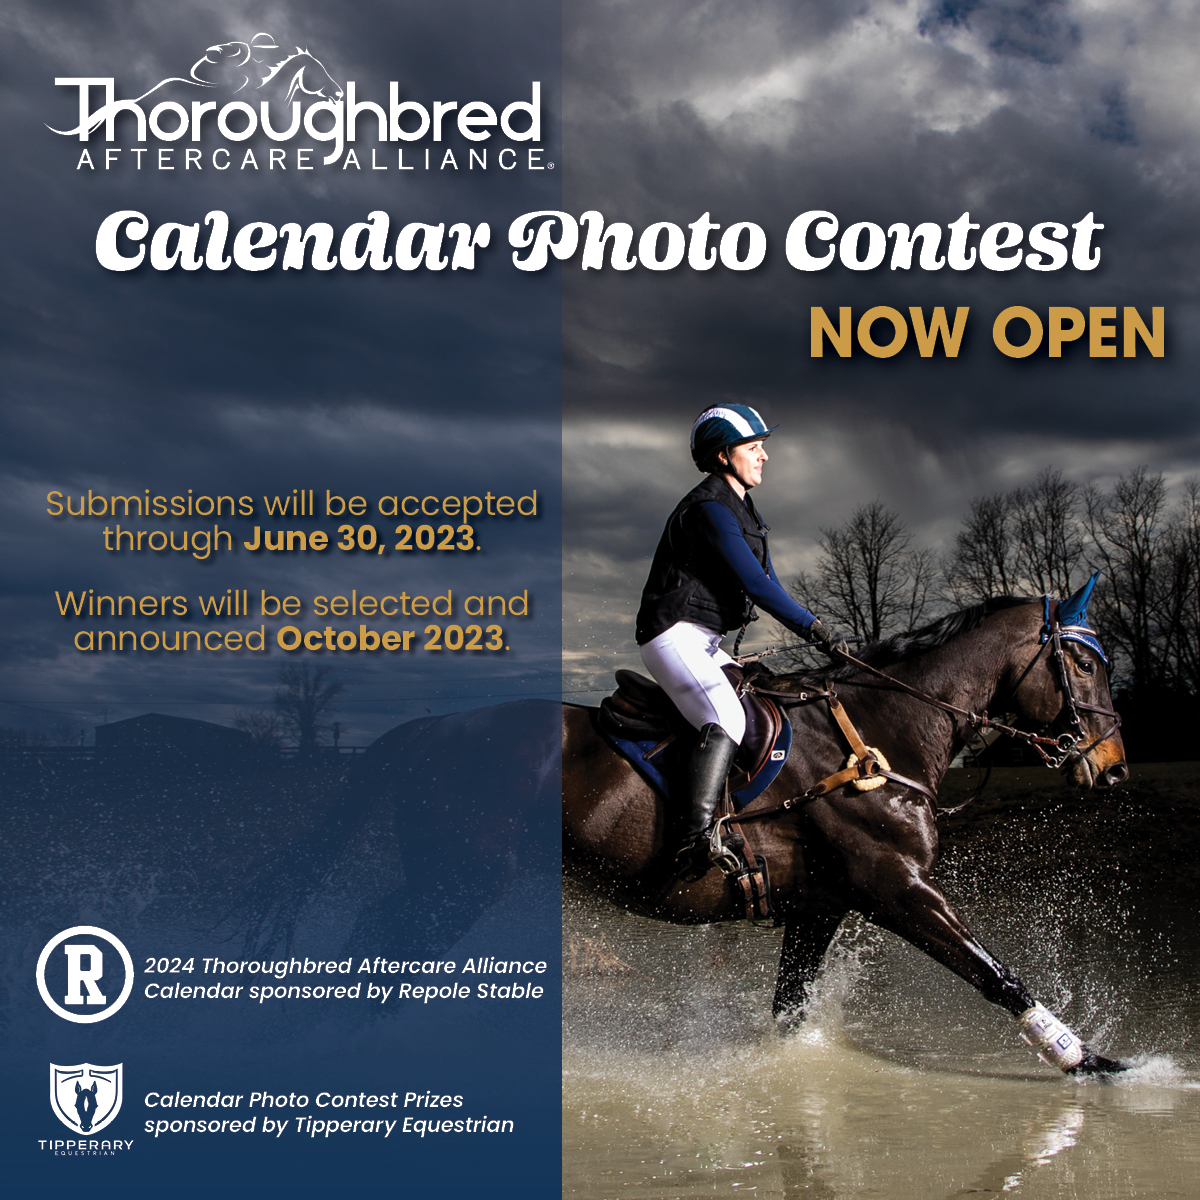 Thoroughbred Aftercare Alliance Third Annual Calendar Photo Contest Now Open